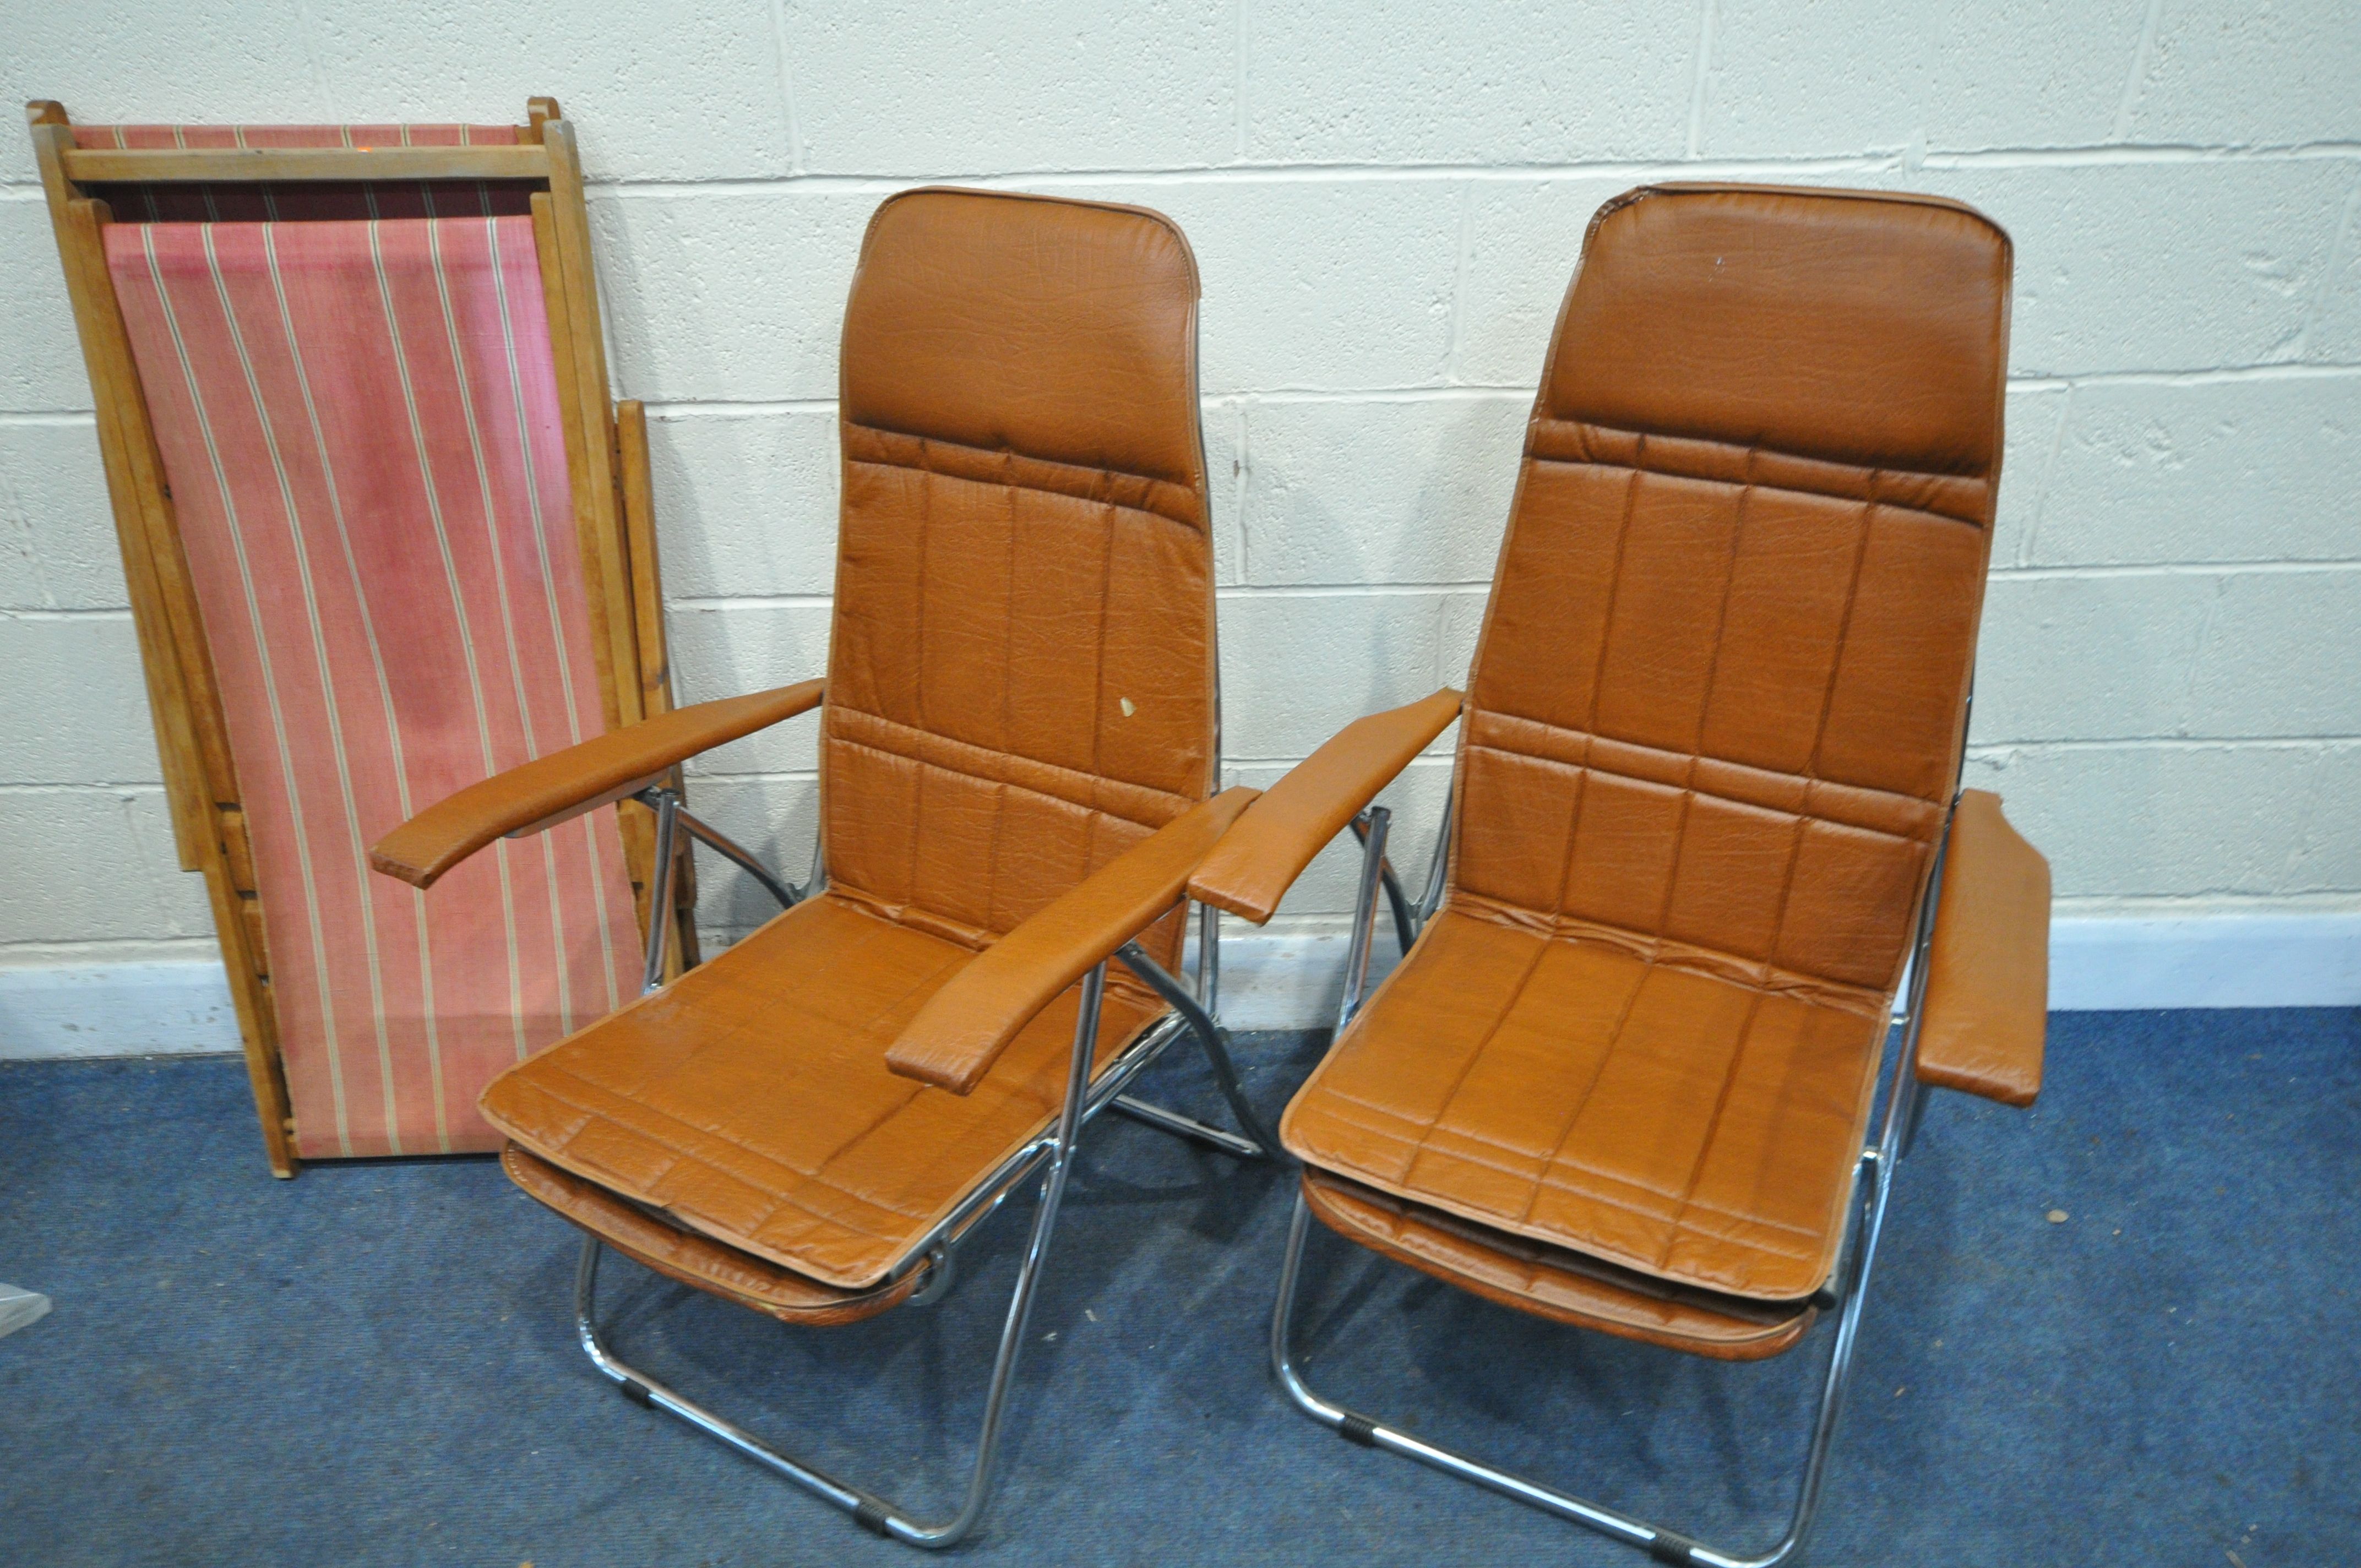 A PAIR MID CENTURY BROWN LEATHERETTE FOLDING CHAIRS, possibly by Maule Marga, and two folding desk